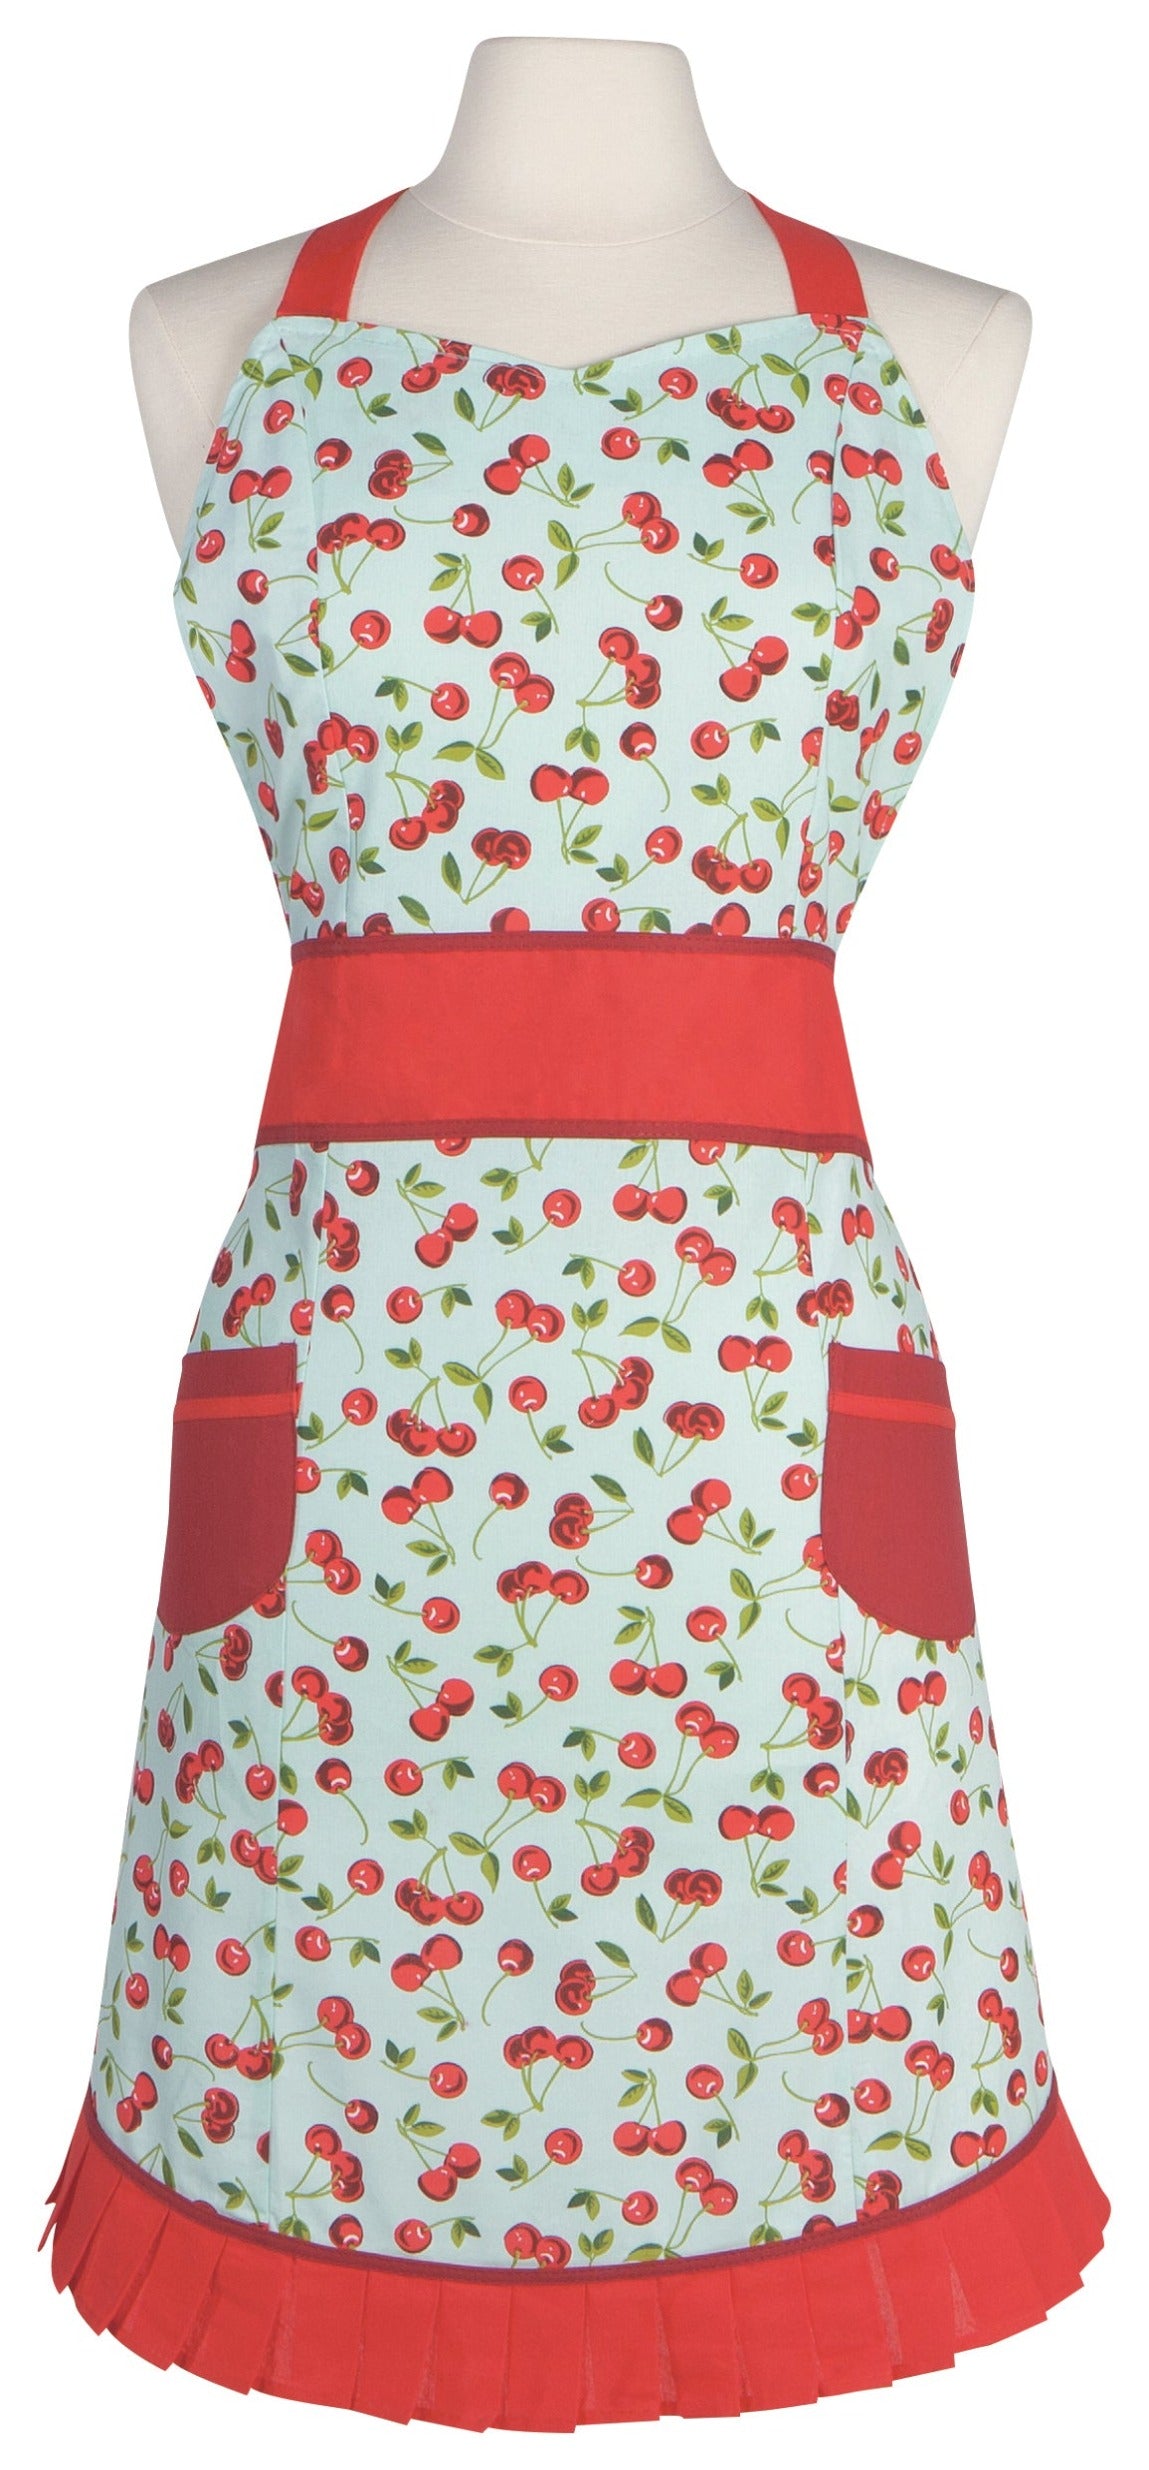 Off white and red apron with bunches of cherries printed on it